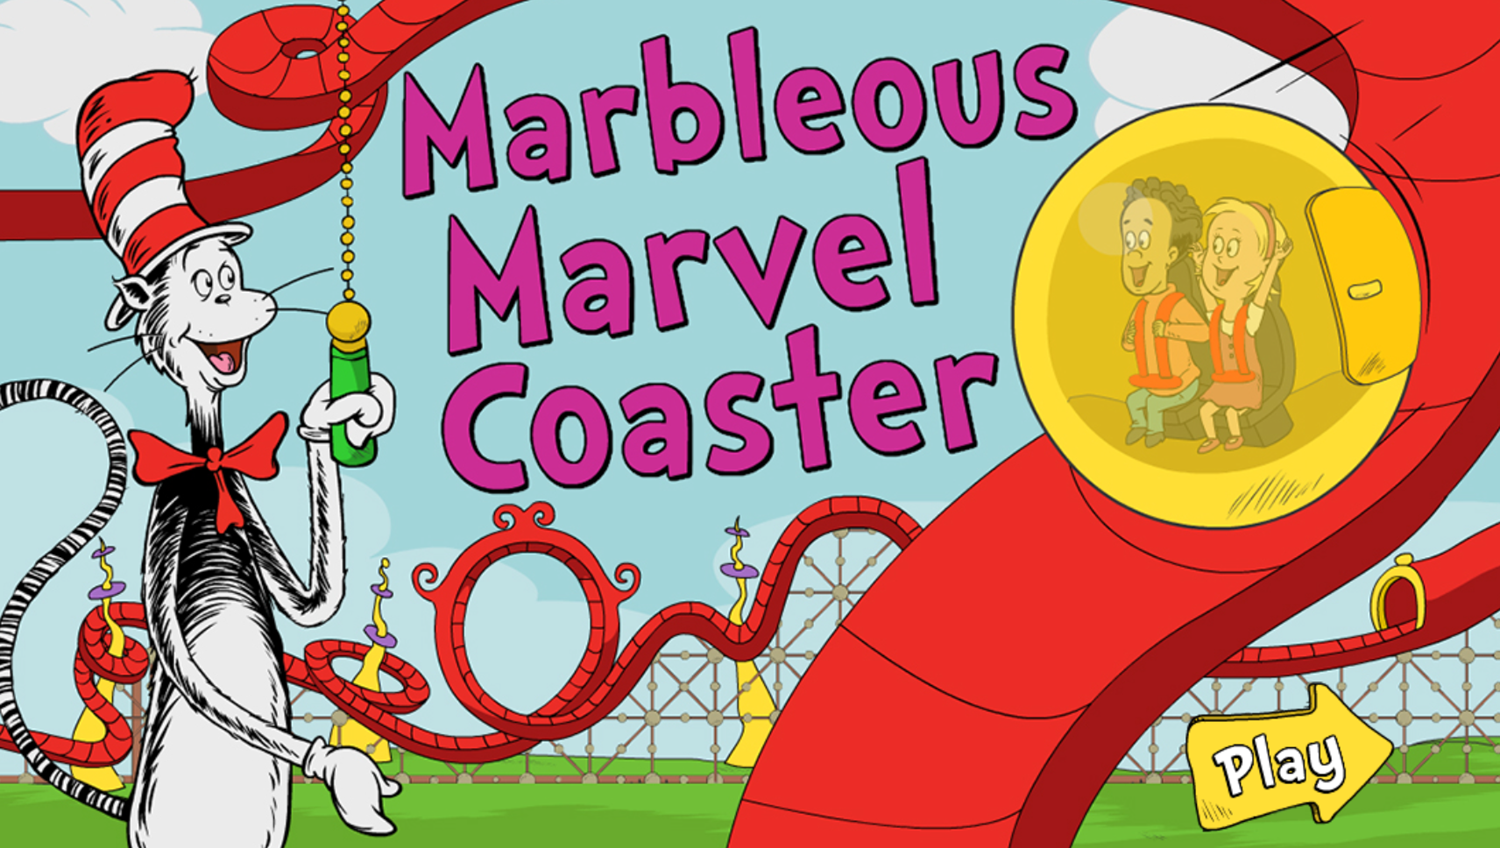 The Cat in the Hat Marbleous Marvel Coaster Game Welcome Screen Screenshot.